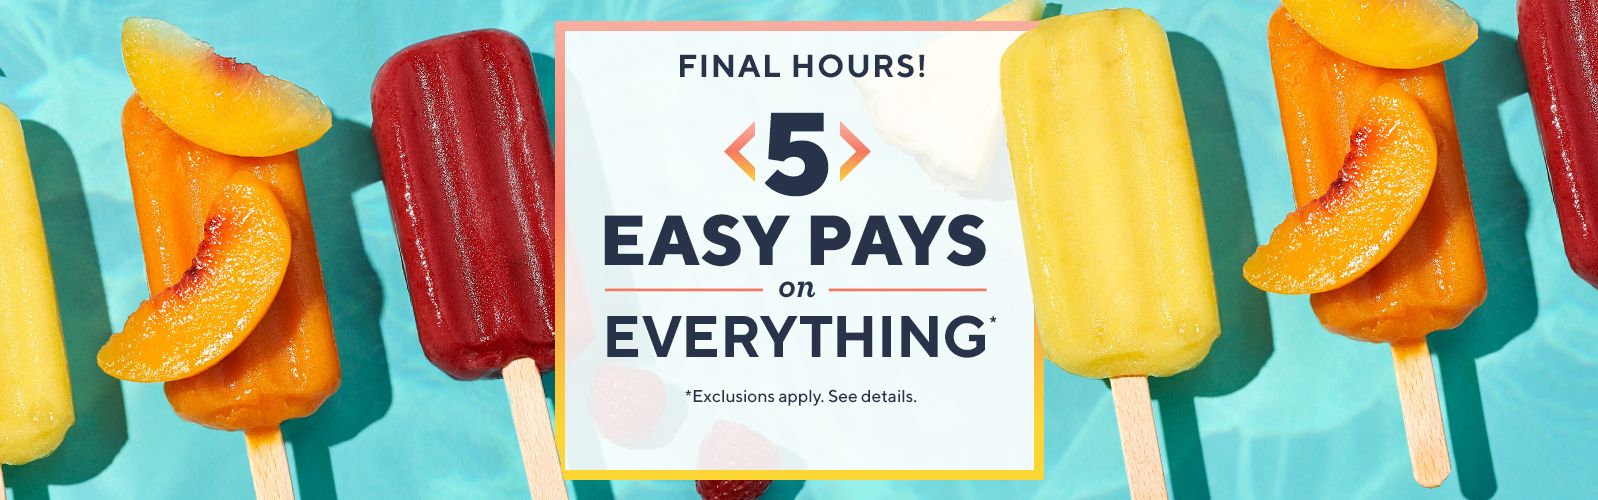 Final Hours! 5 Easy Pays on Everything* *Exclusions apply. See details. 